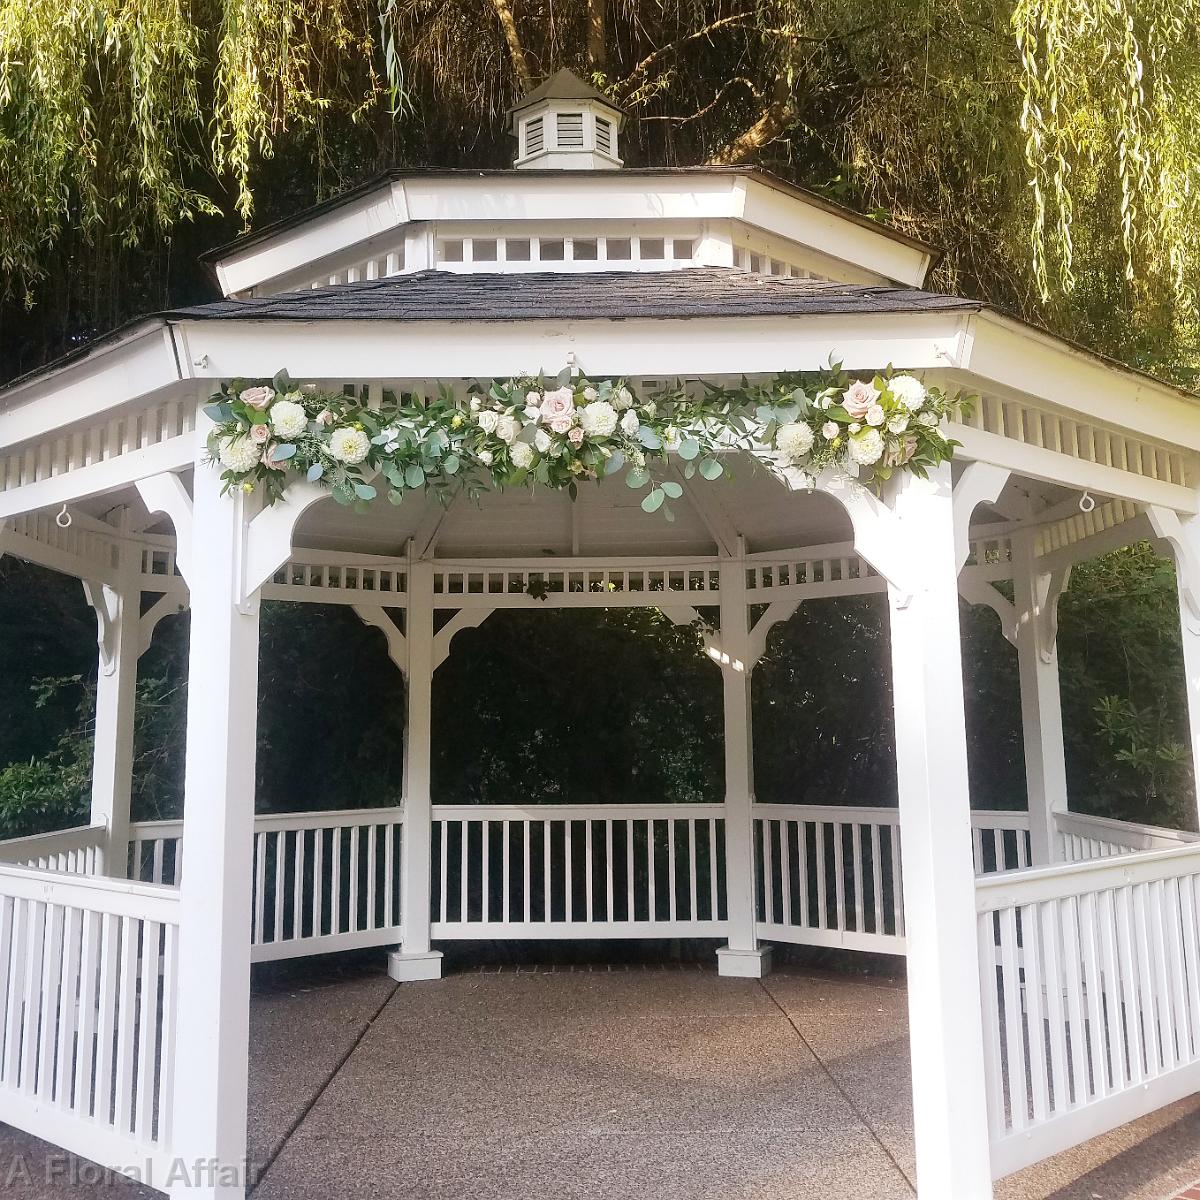 CF09263-Delicate Petal Pink and White Floral Garland on Gazebo